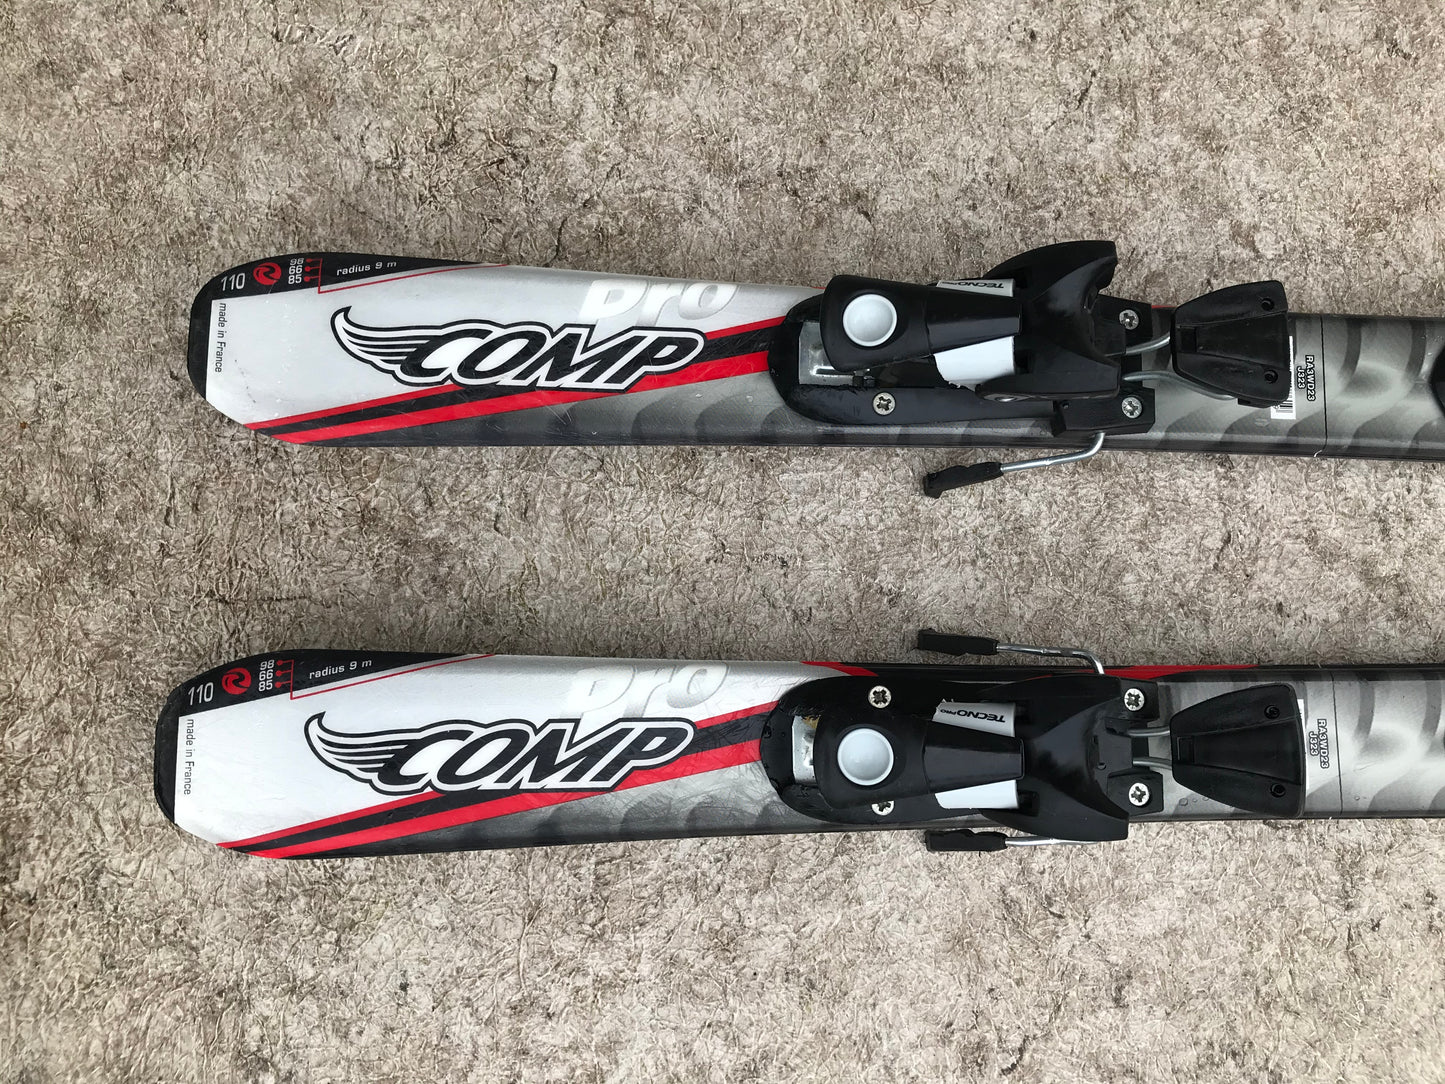 Ski 100 Rossignol Black Silver Red Parabolic With Bindings